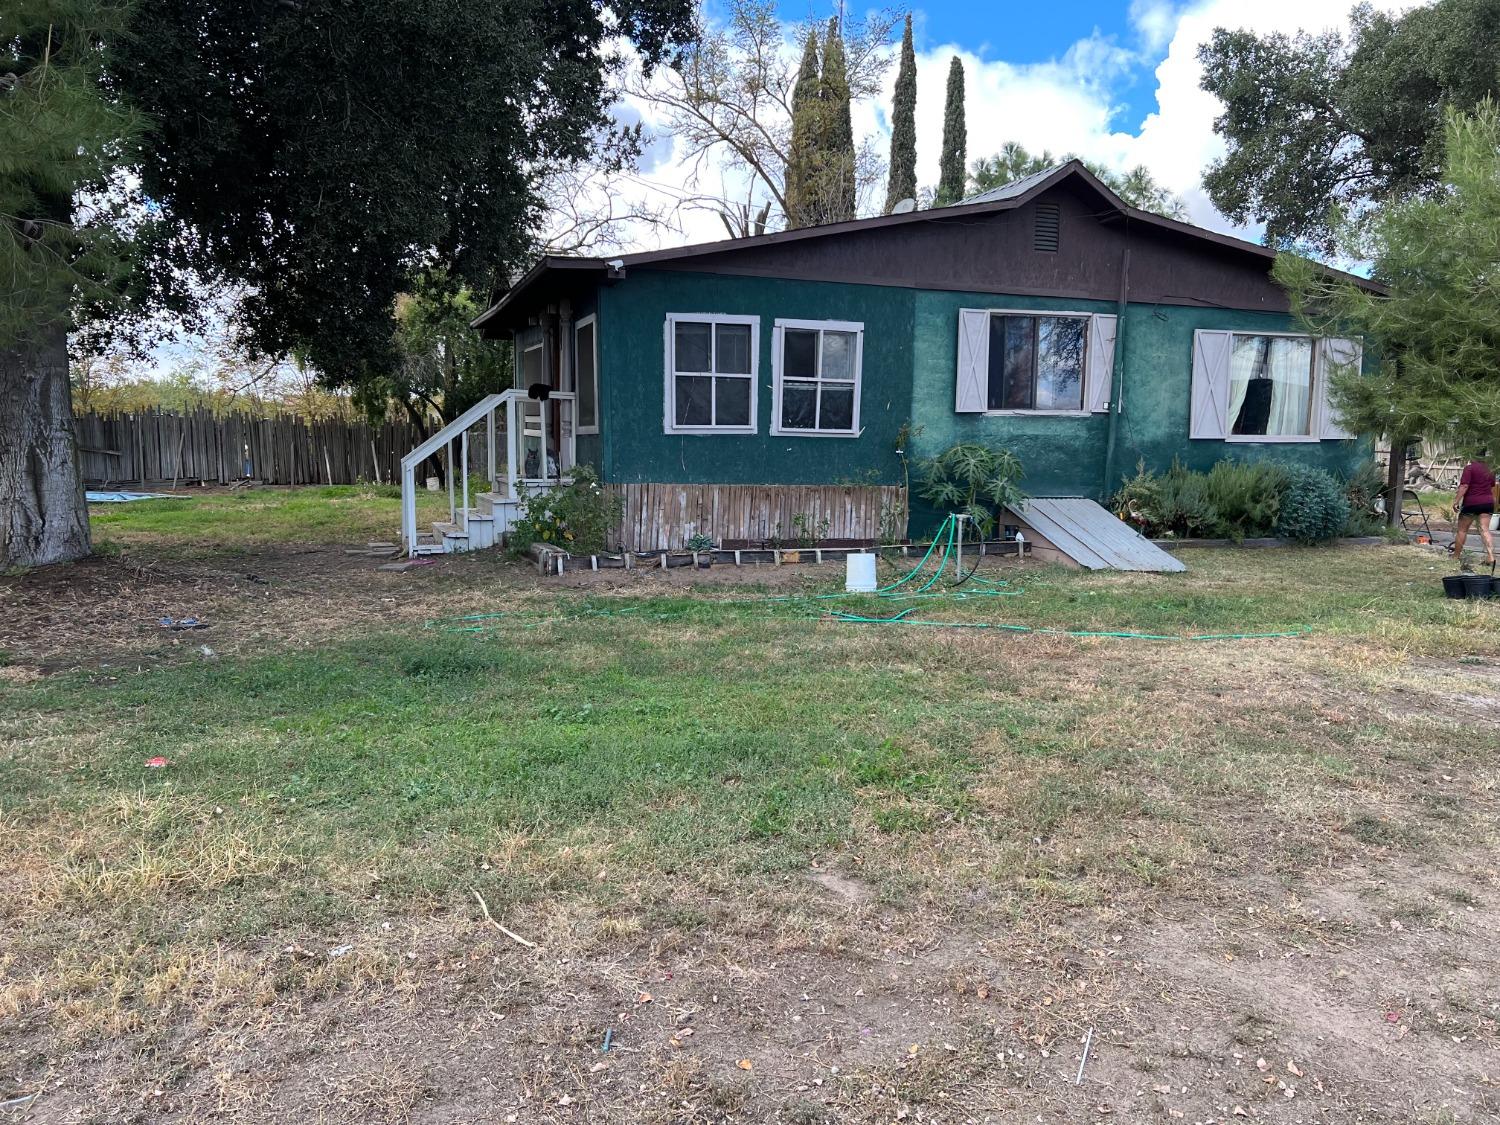 Photo of 10854 White Crane Rd in Atwater, CA